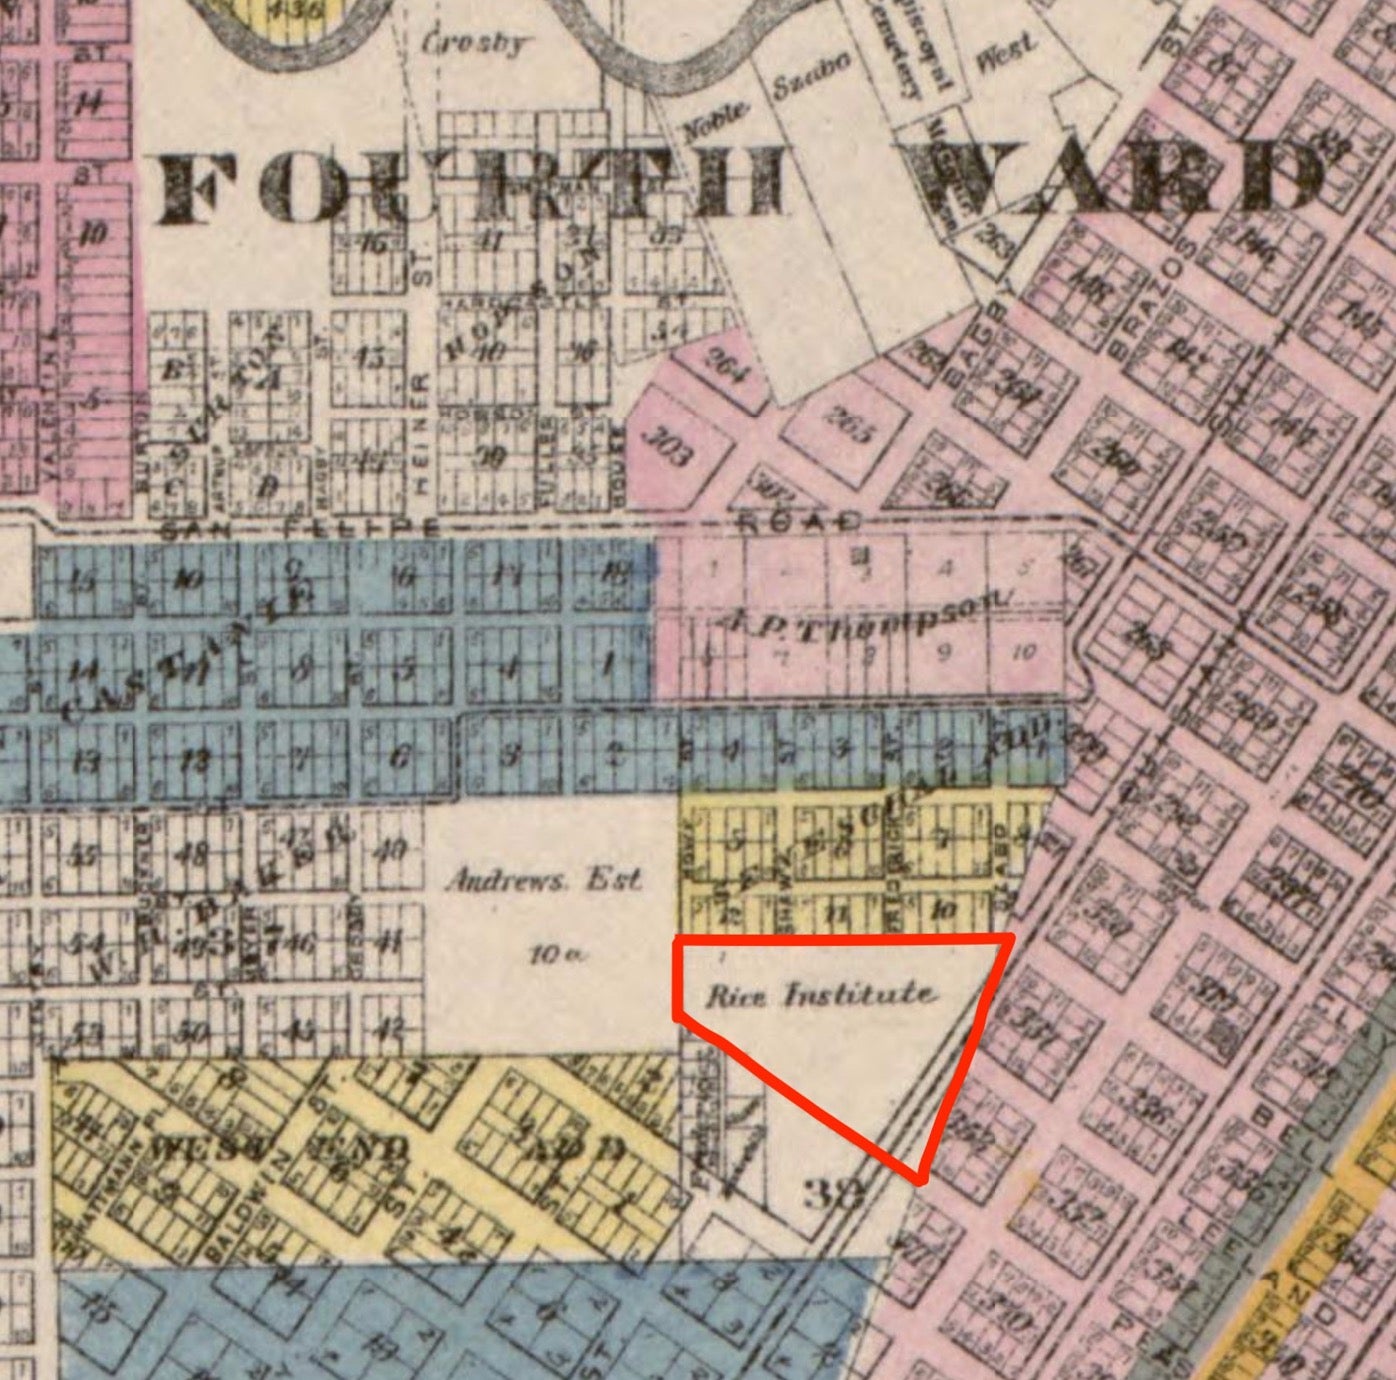 Clipping from 1895 map showing Rice Institute property in the Fourth Ward